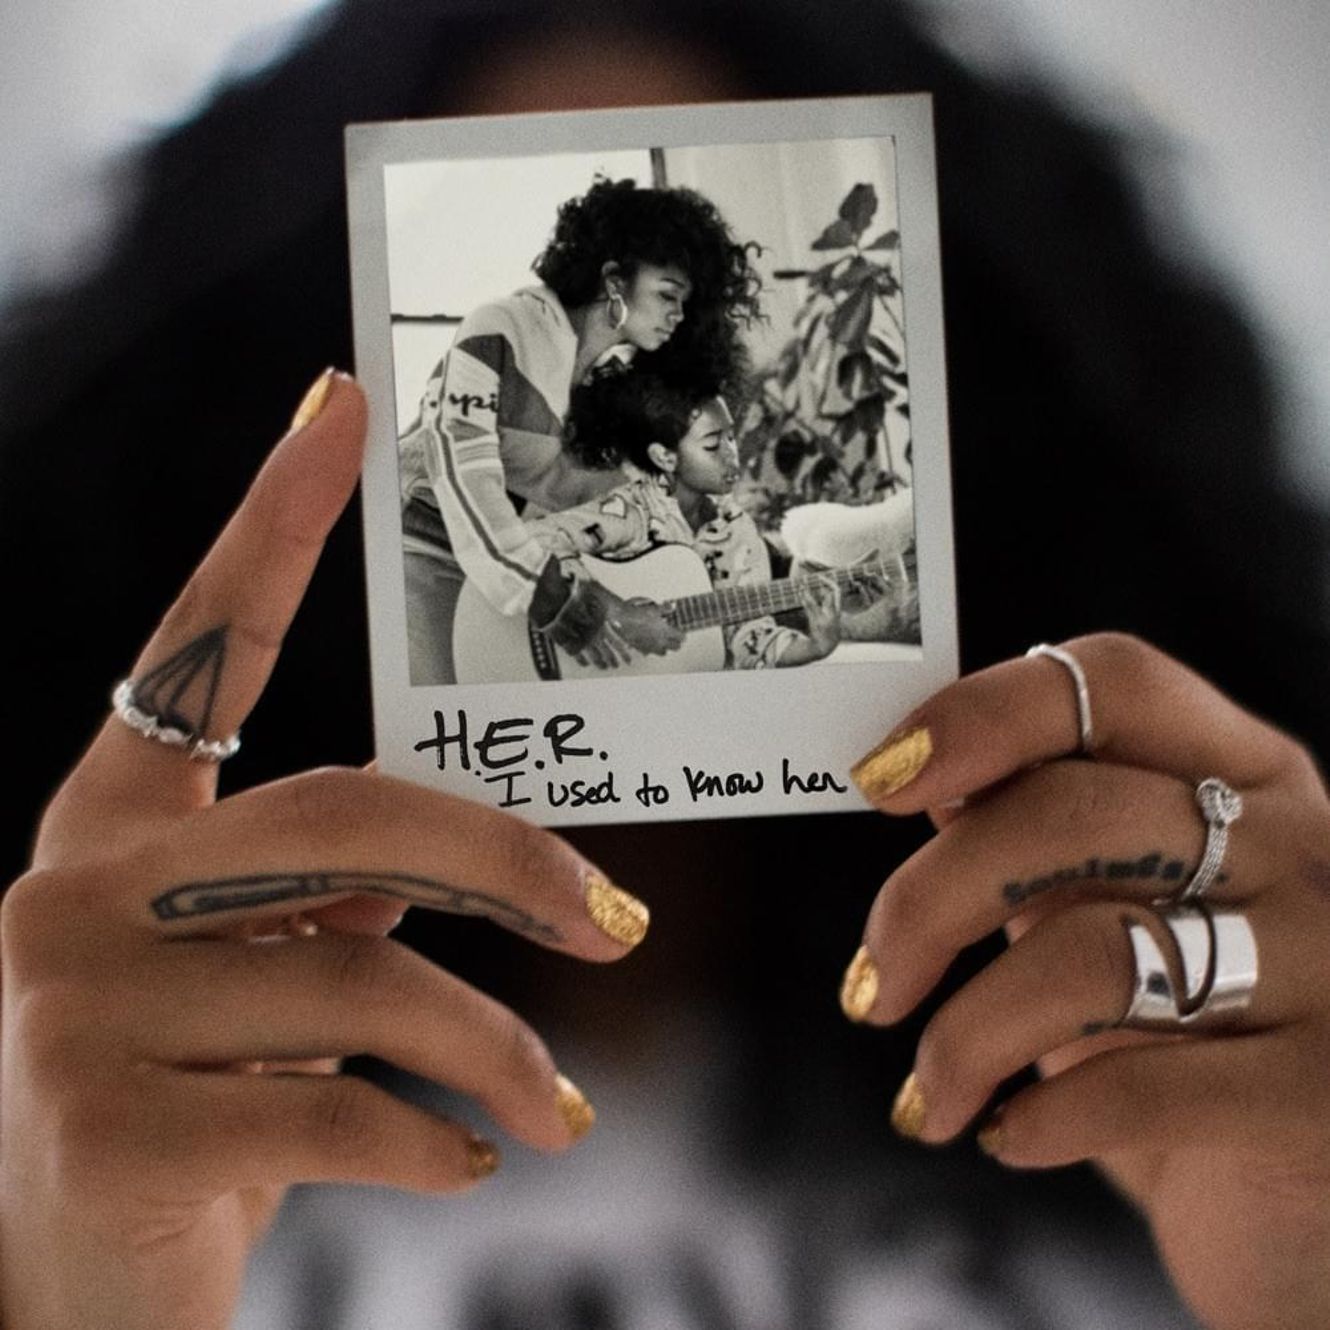 H.E.R.’s ‘I Used to Know Her’ is triumphant